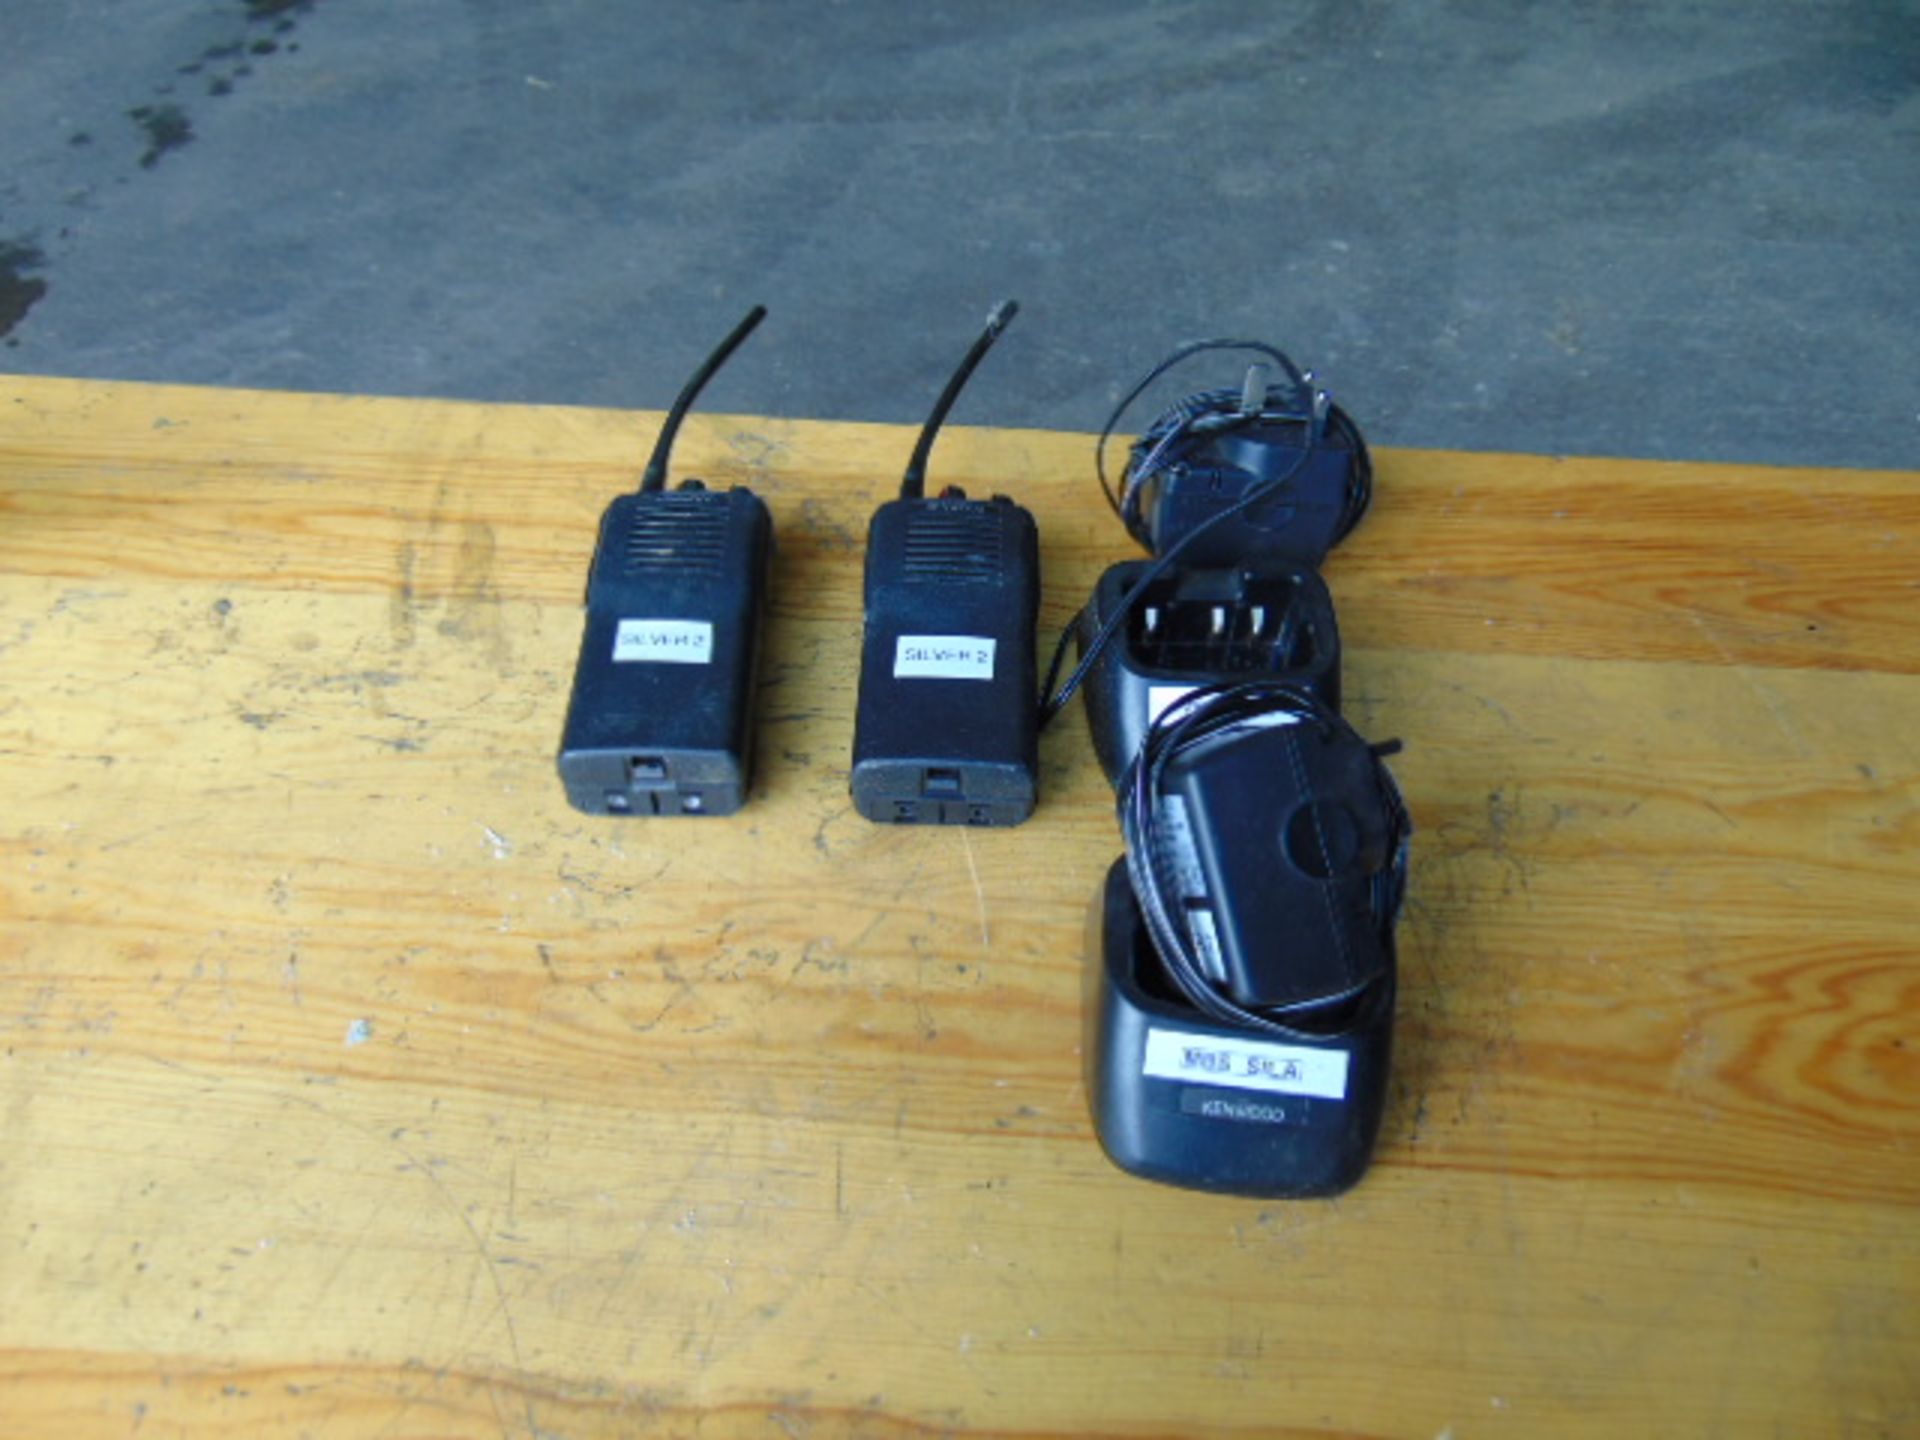 2 x Kenwood Walkie Talkies c/w Chargers and Main Adapters - Bild 5 aus 6